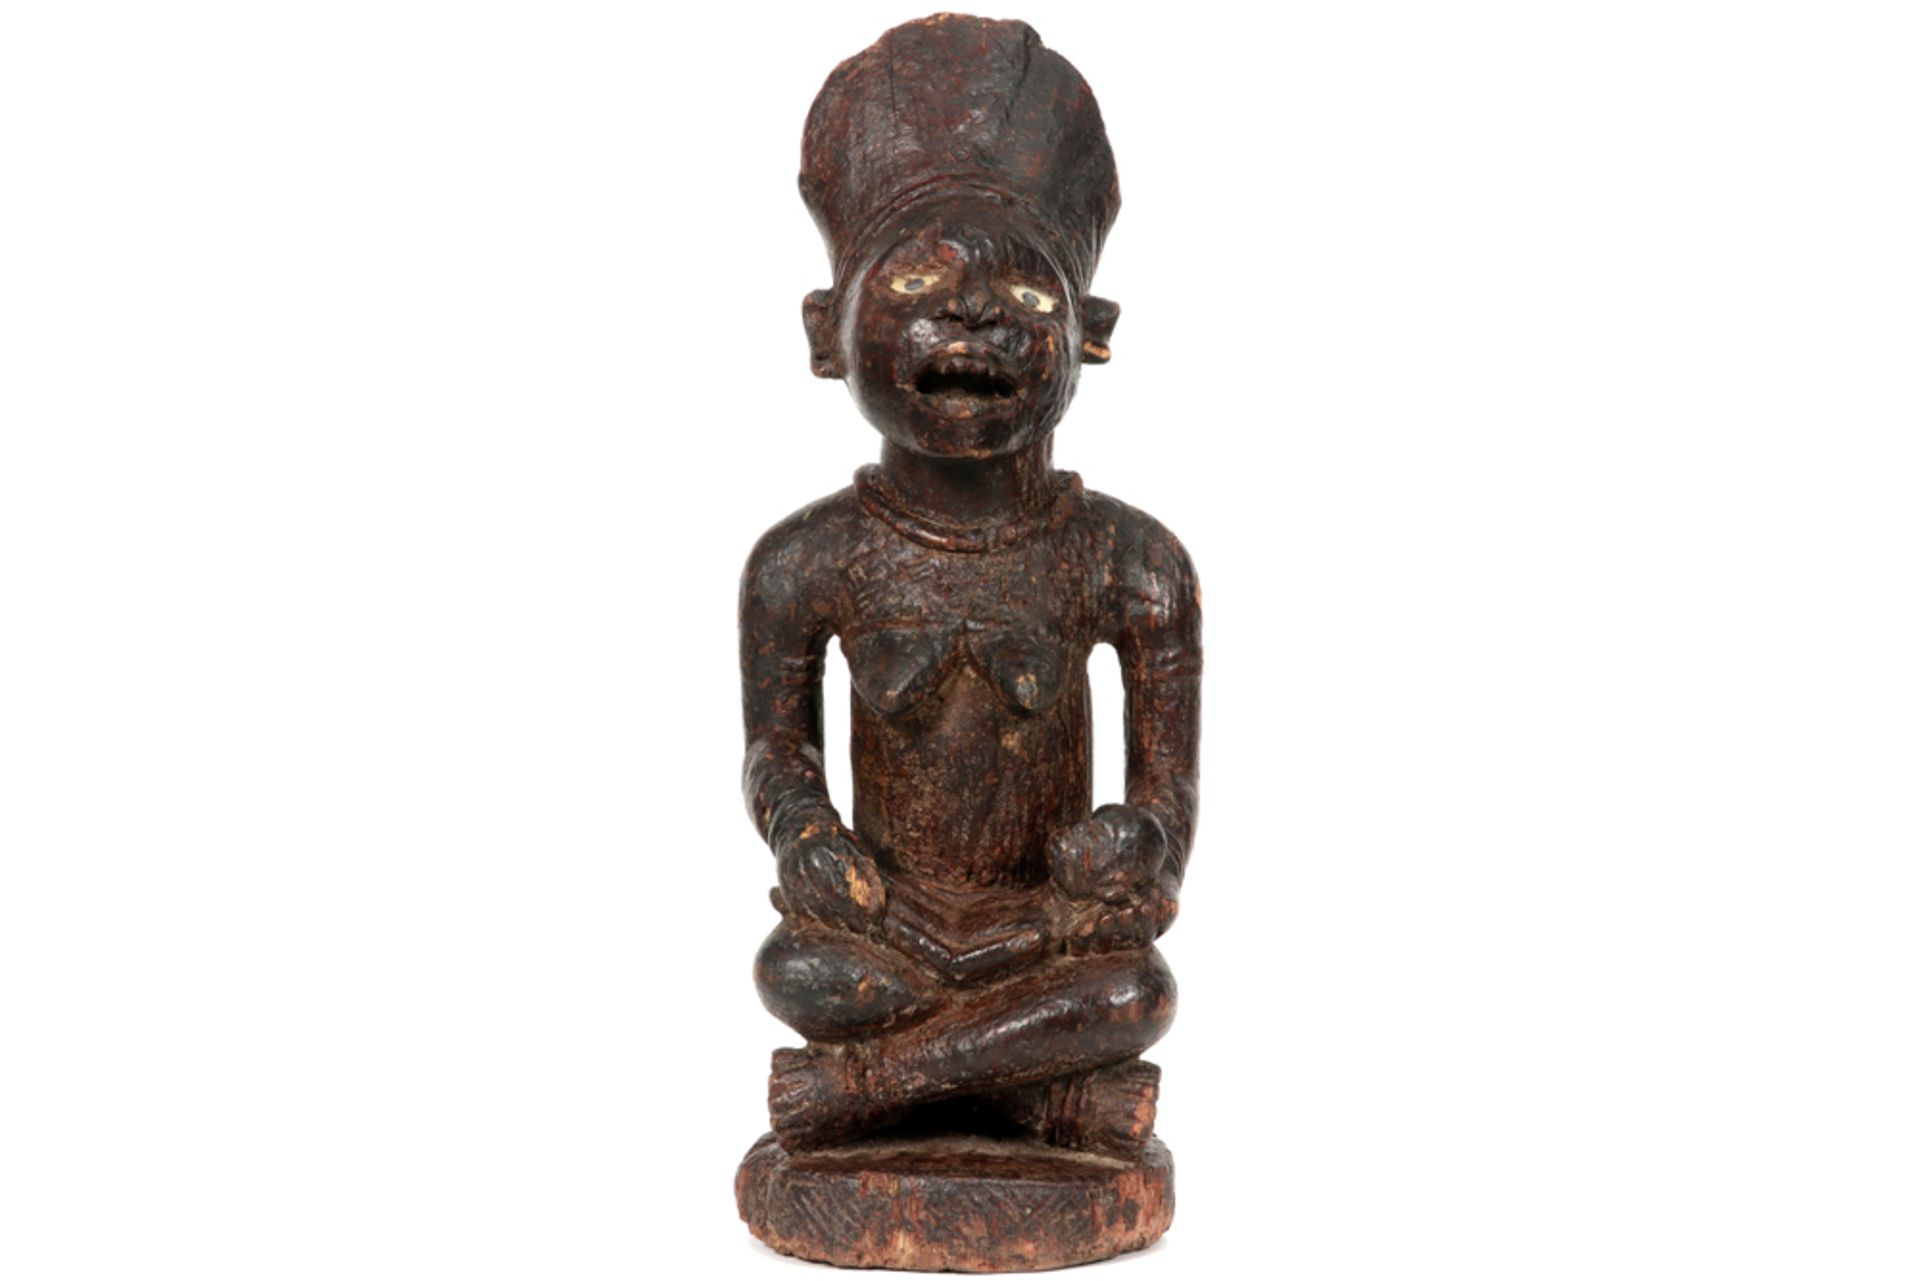 African Congolese "Phemba" maternity sculpture, collected around 1950 prov : former collection of